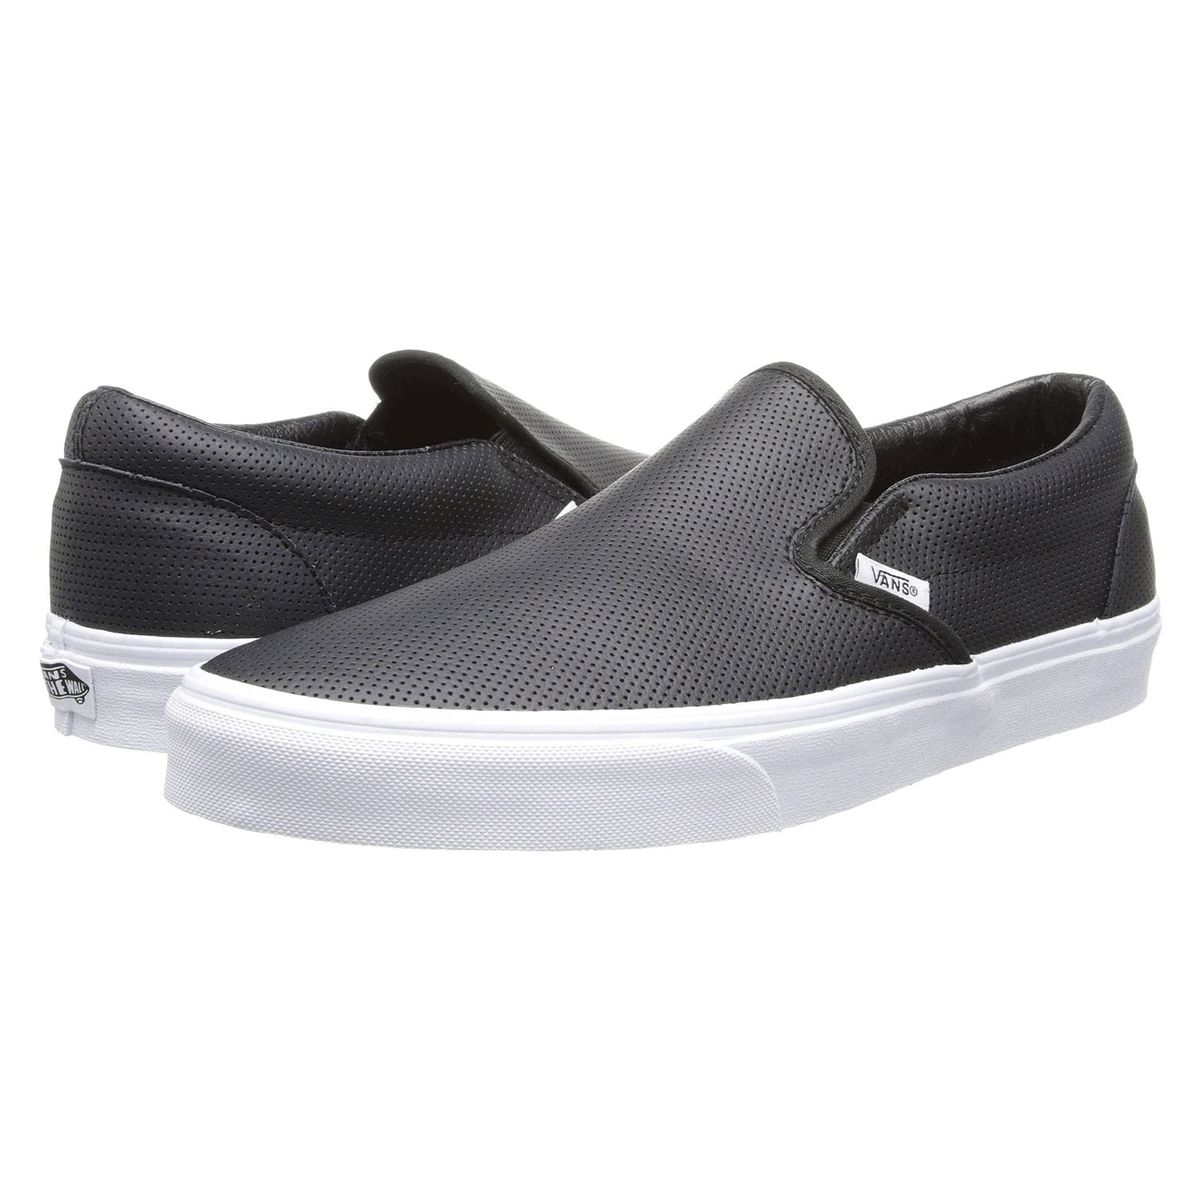 Vans Classic Slip-On Shoes Are the Most Comfortable on Zappos | InStyle